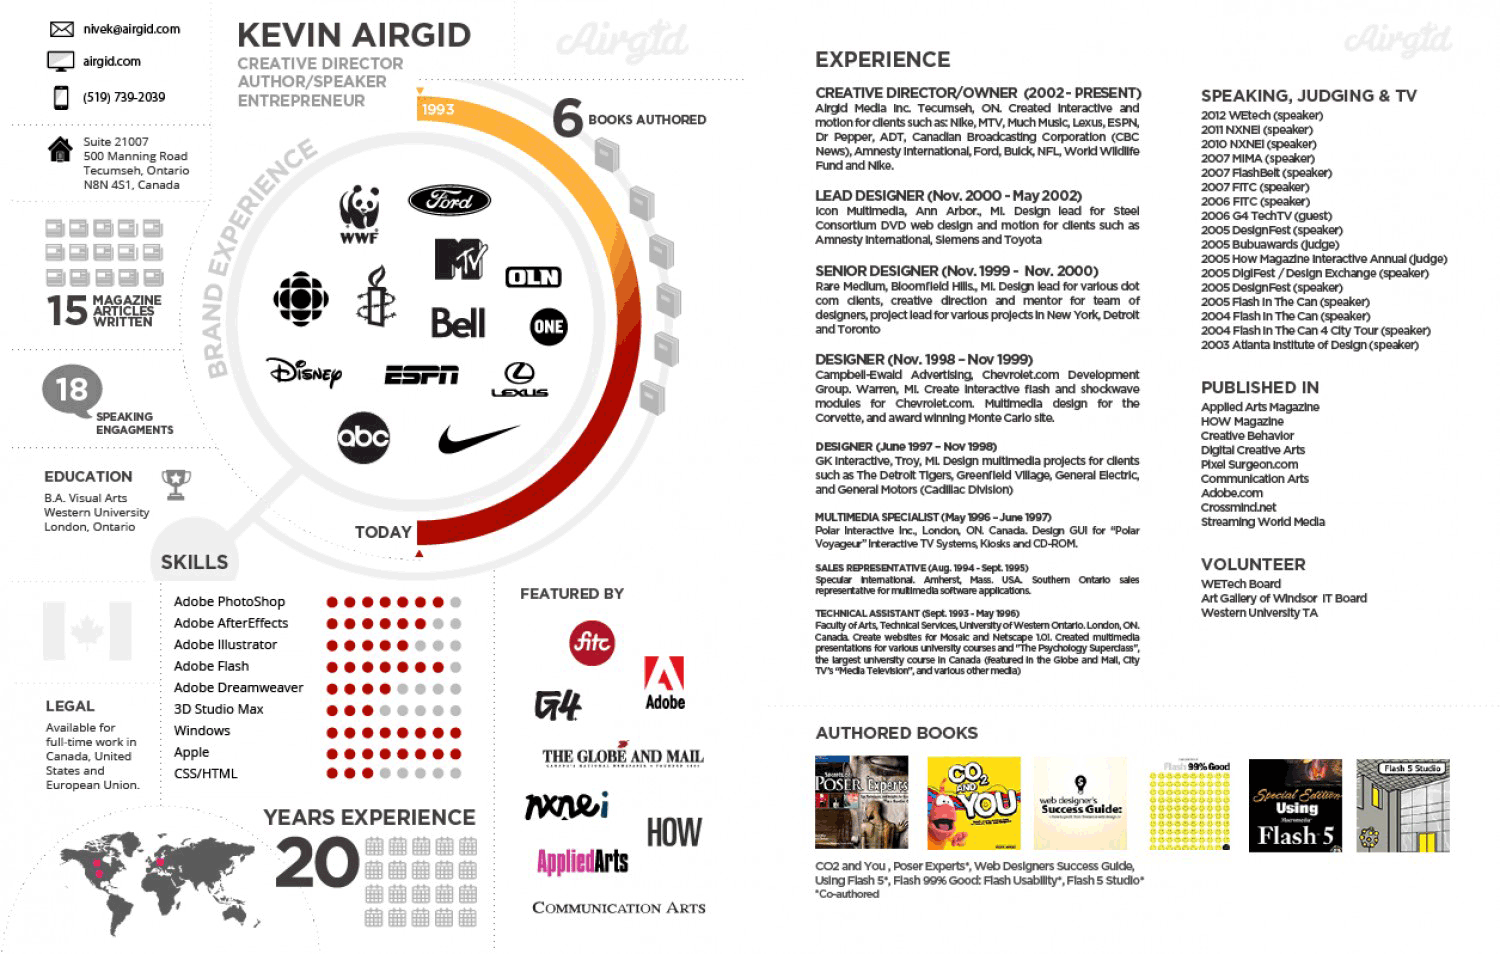 Infographic cv Kevin Airgid